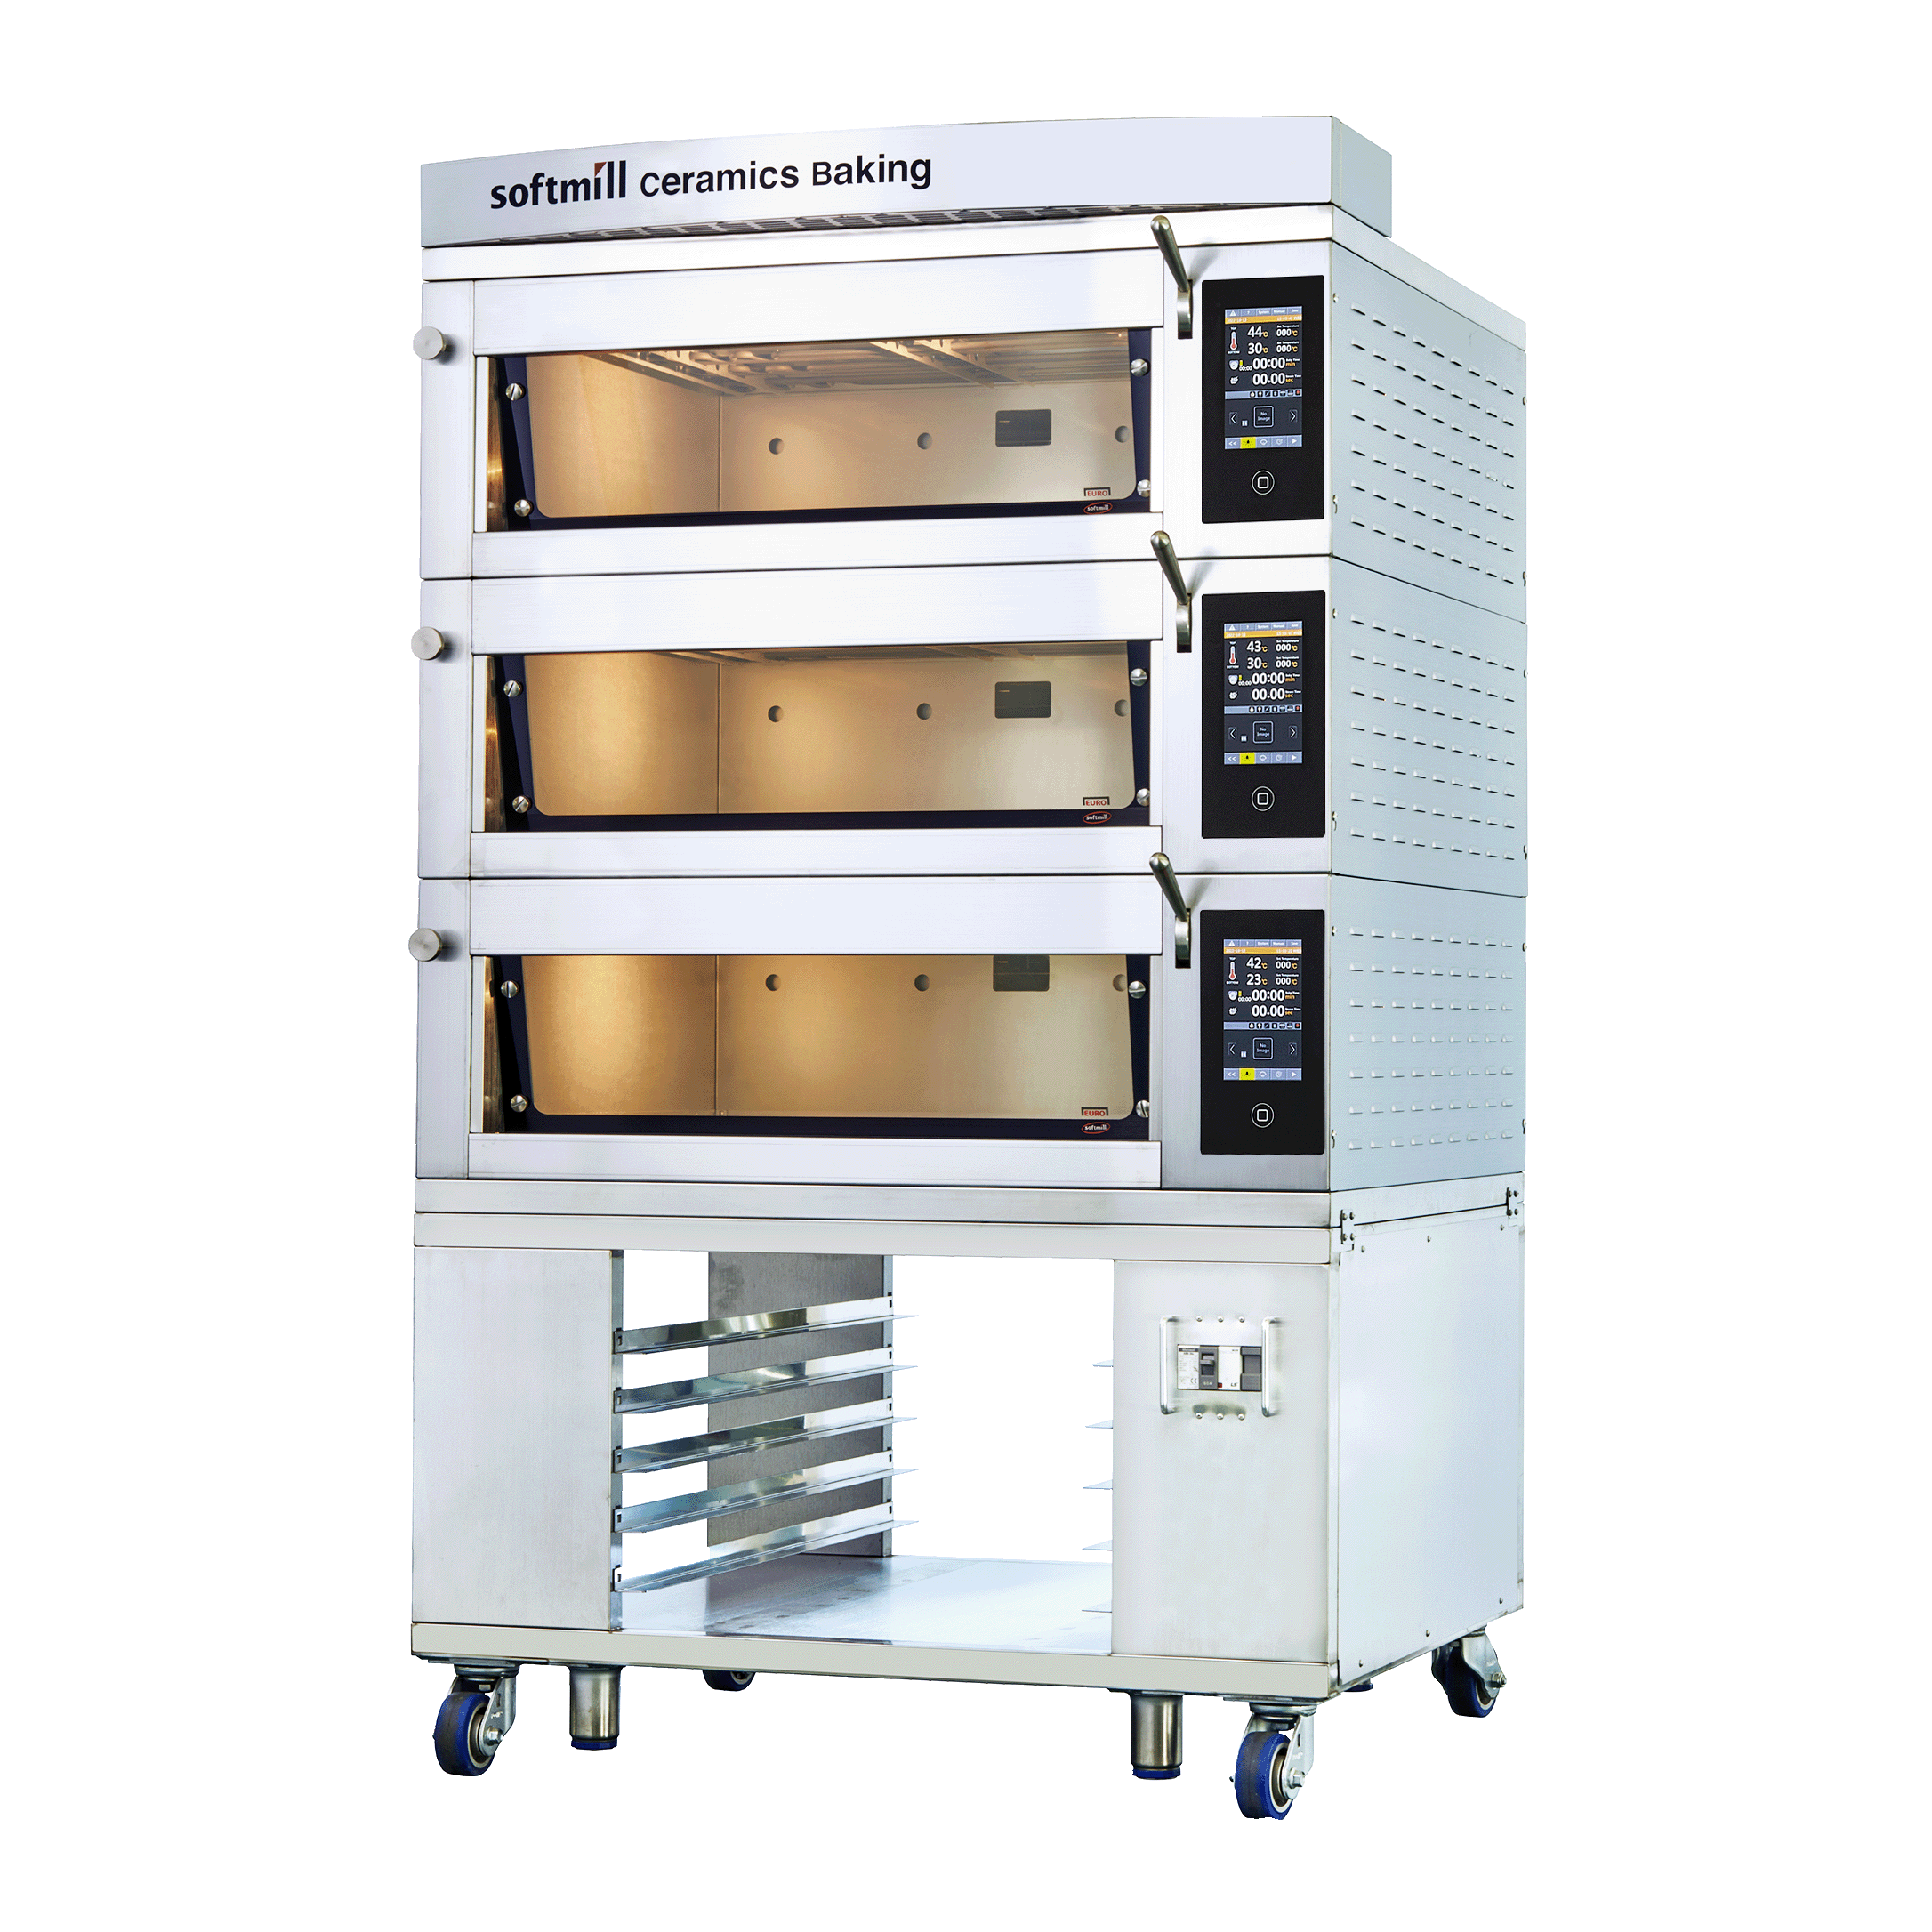 Euro-Baker Oven 2 trays 3 tiers detail page link